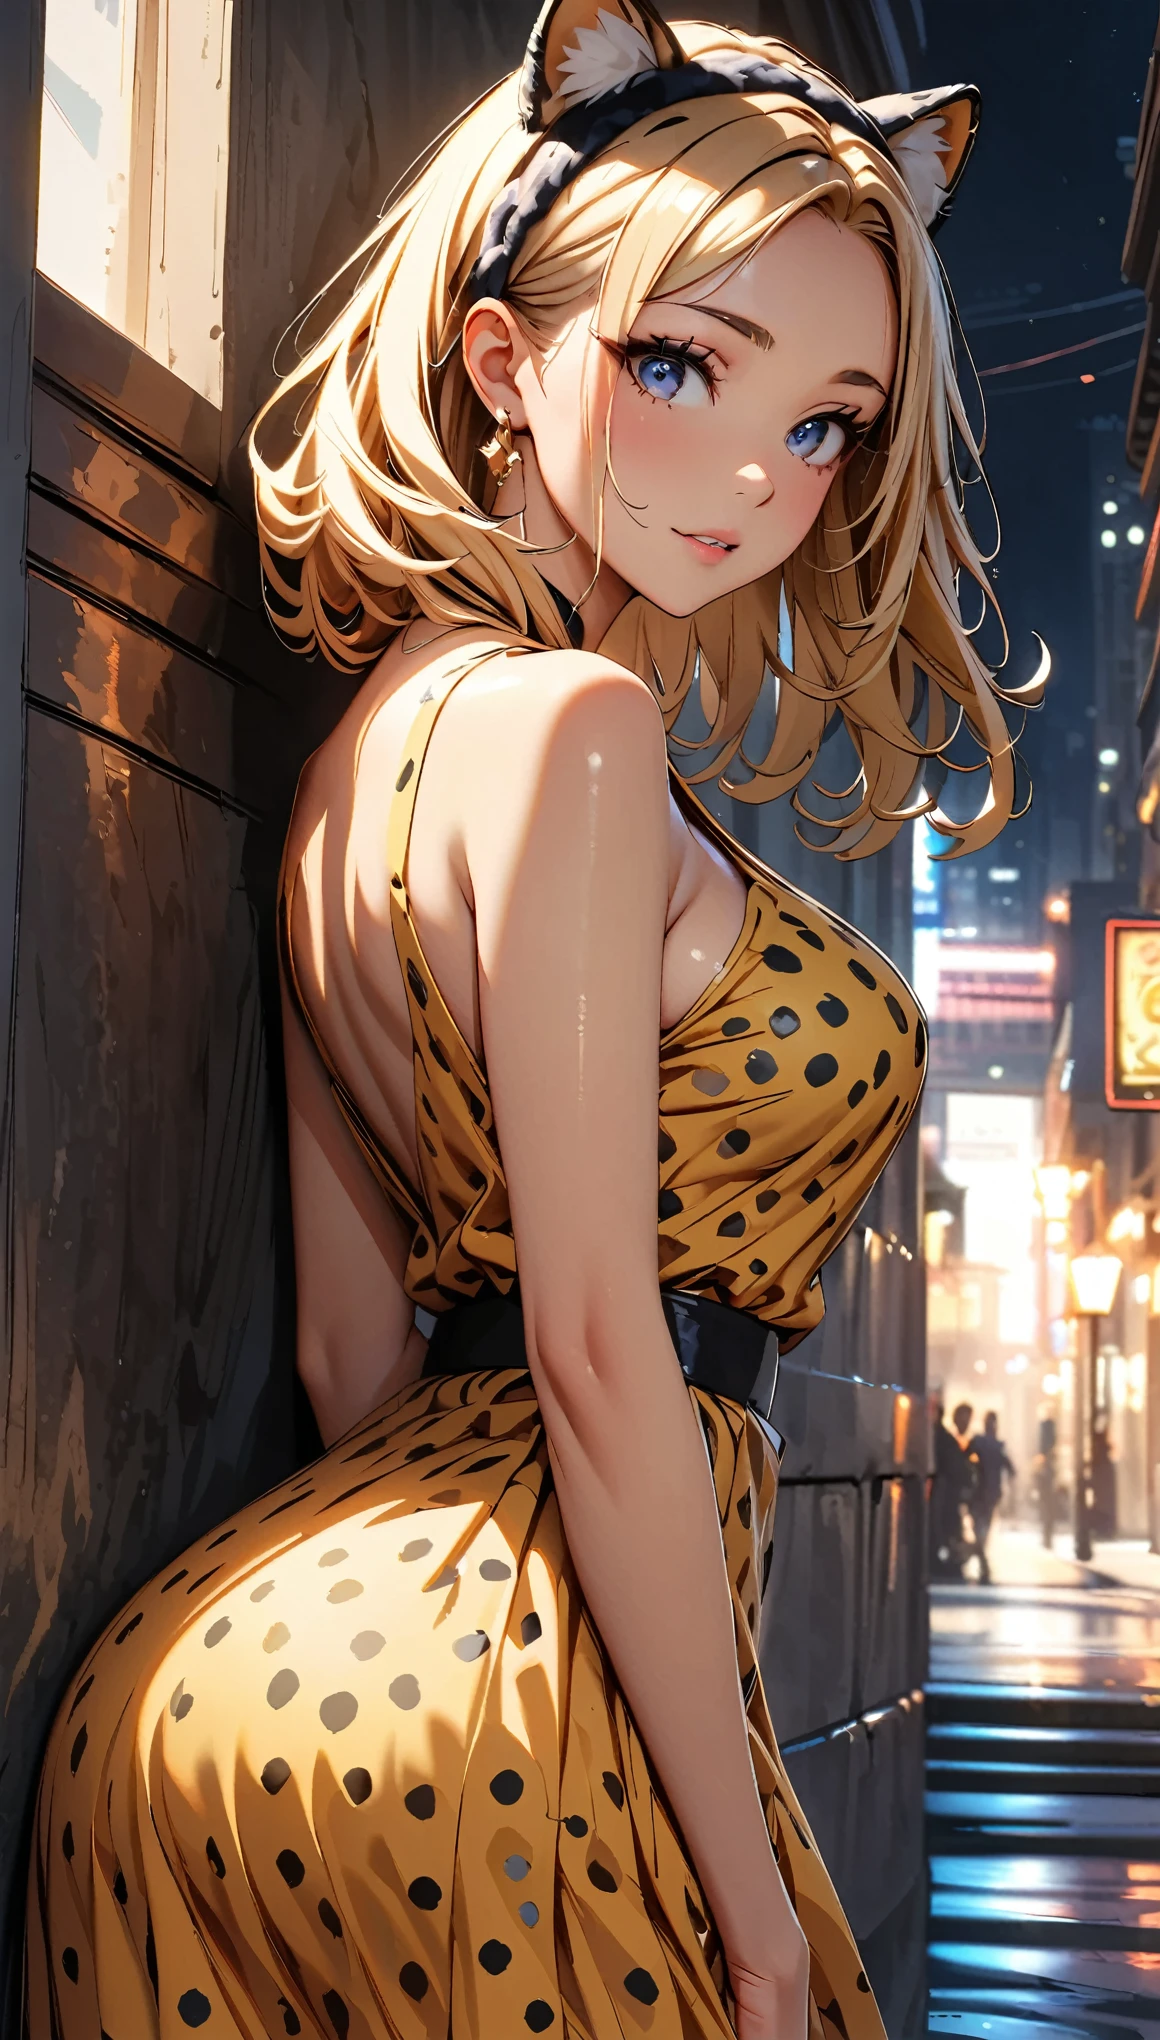 (Highest quality:1.2, High Detail, masterpiece:1.2, Best aesthetics), (1 girl), Beautiful woman, Cheetah Girl:1.2, Beautiful detailed eyes, Beautiful detailed lips, Highly detailed face, Detailed Fashion, elegant, luxury, High quality fabric, Shine, Shine, Leaning against a wall, Gaze lustfully at the viewer, Downtown, ((Cheetah Headband, Yellow and black polka dot dress:1.4, Obscene)), Cowboy Shot, Dramatic lighting, Cinematic, Bright colors, Intricate details, Chiaroscuro lighting.